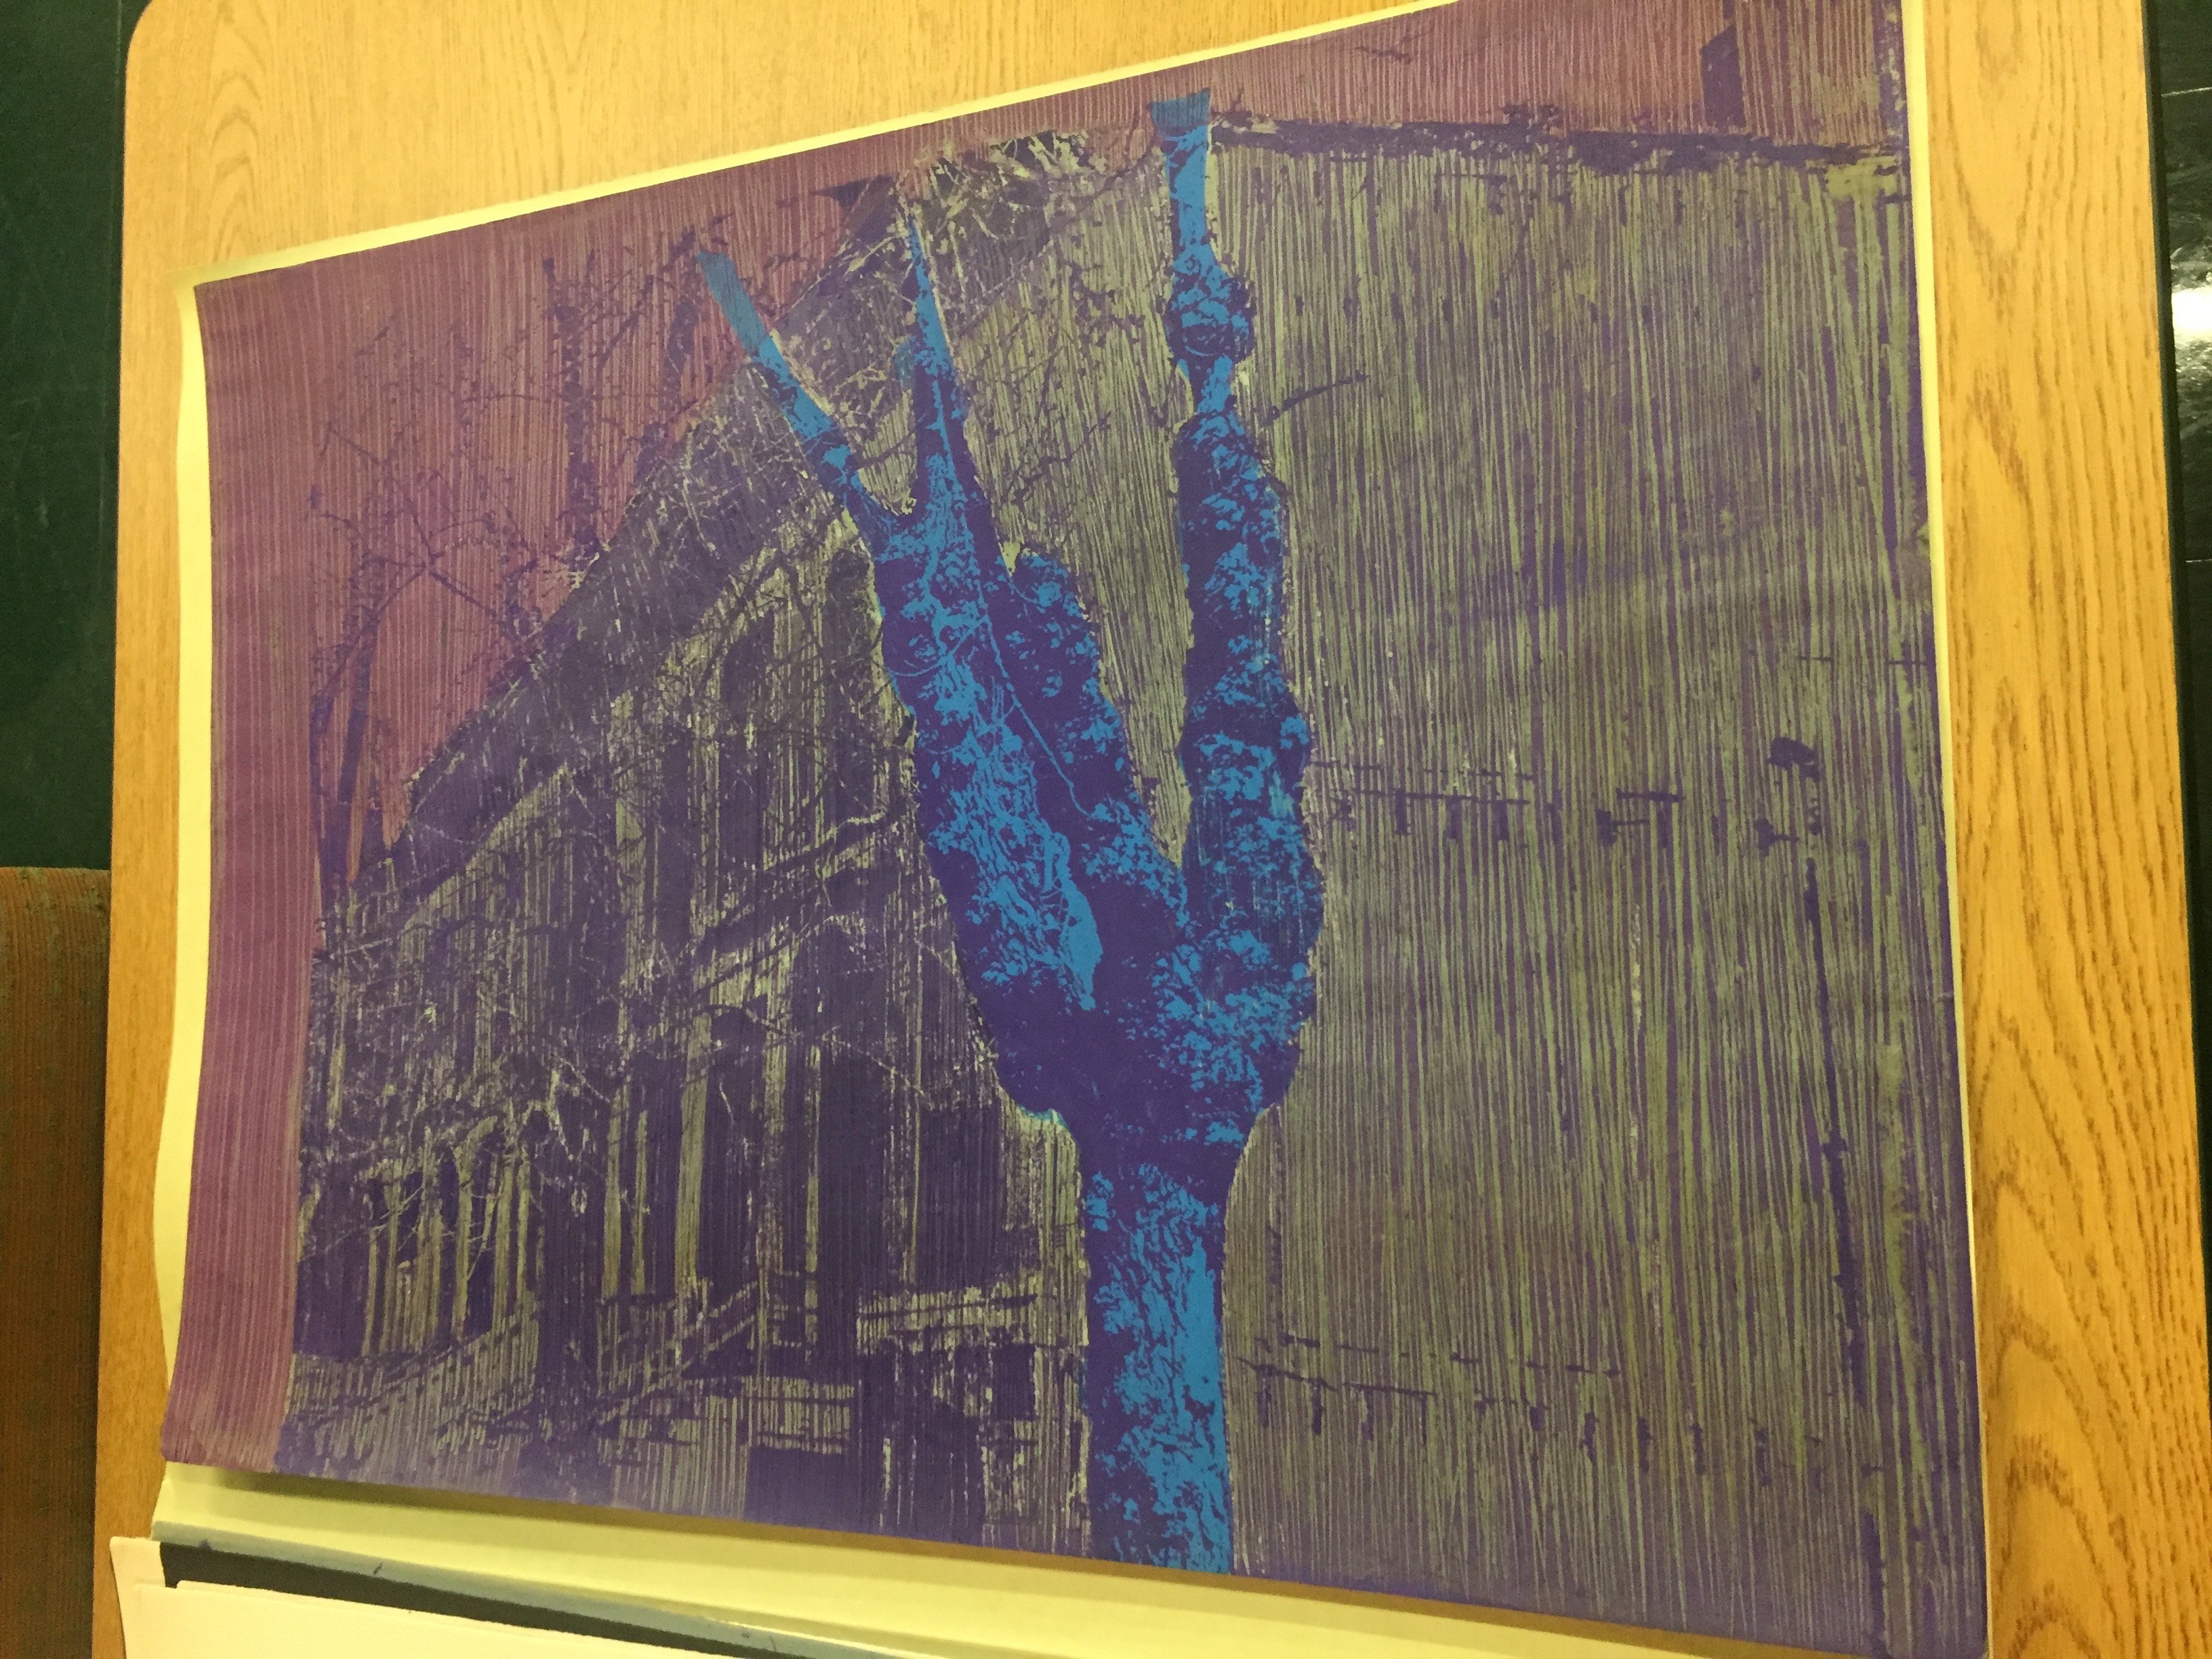 Jose Williams. “East 38th Street,” 1975. A tree (in blue) stands starkly against a distant row of buildings (in yellow). Courtesy of Illinois Institute of Technology, Paul Galvin Library, Special Collections .